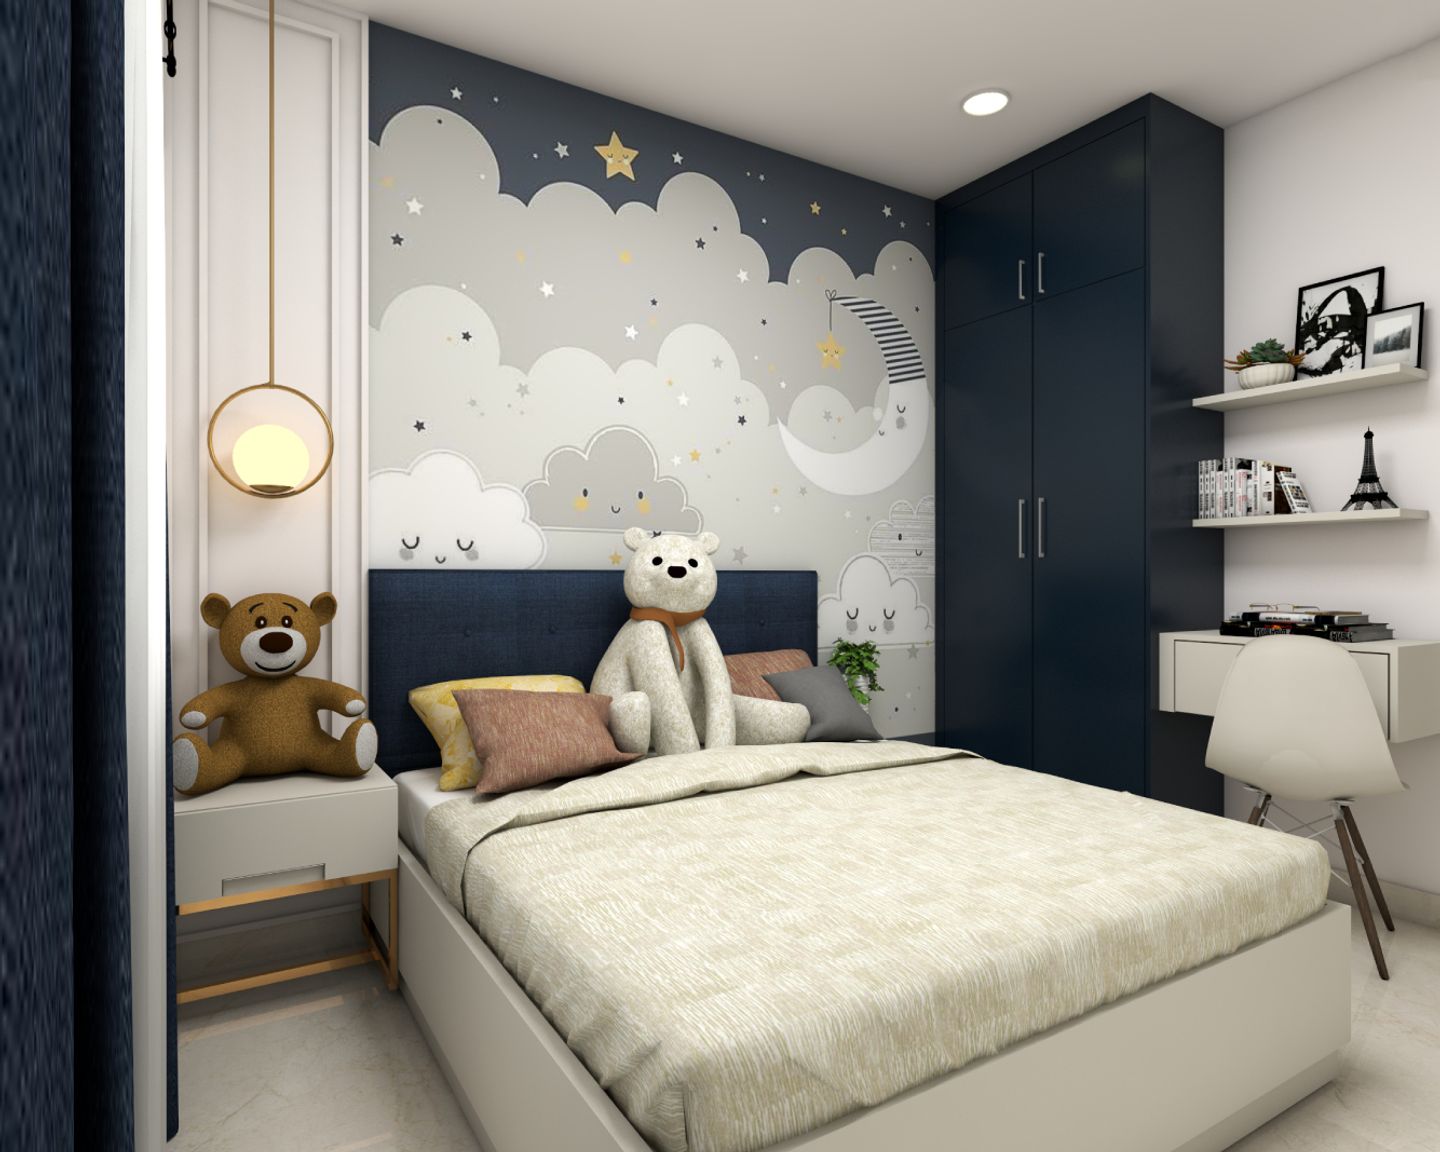 Boys Room Design With Cloud-Themed Wallpaper | Livspace